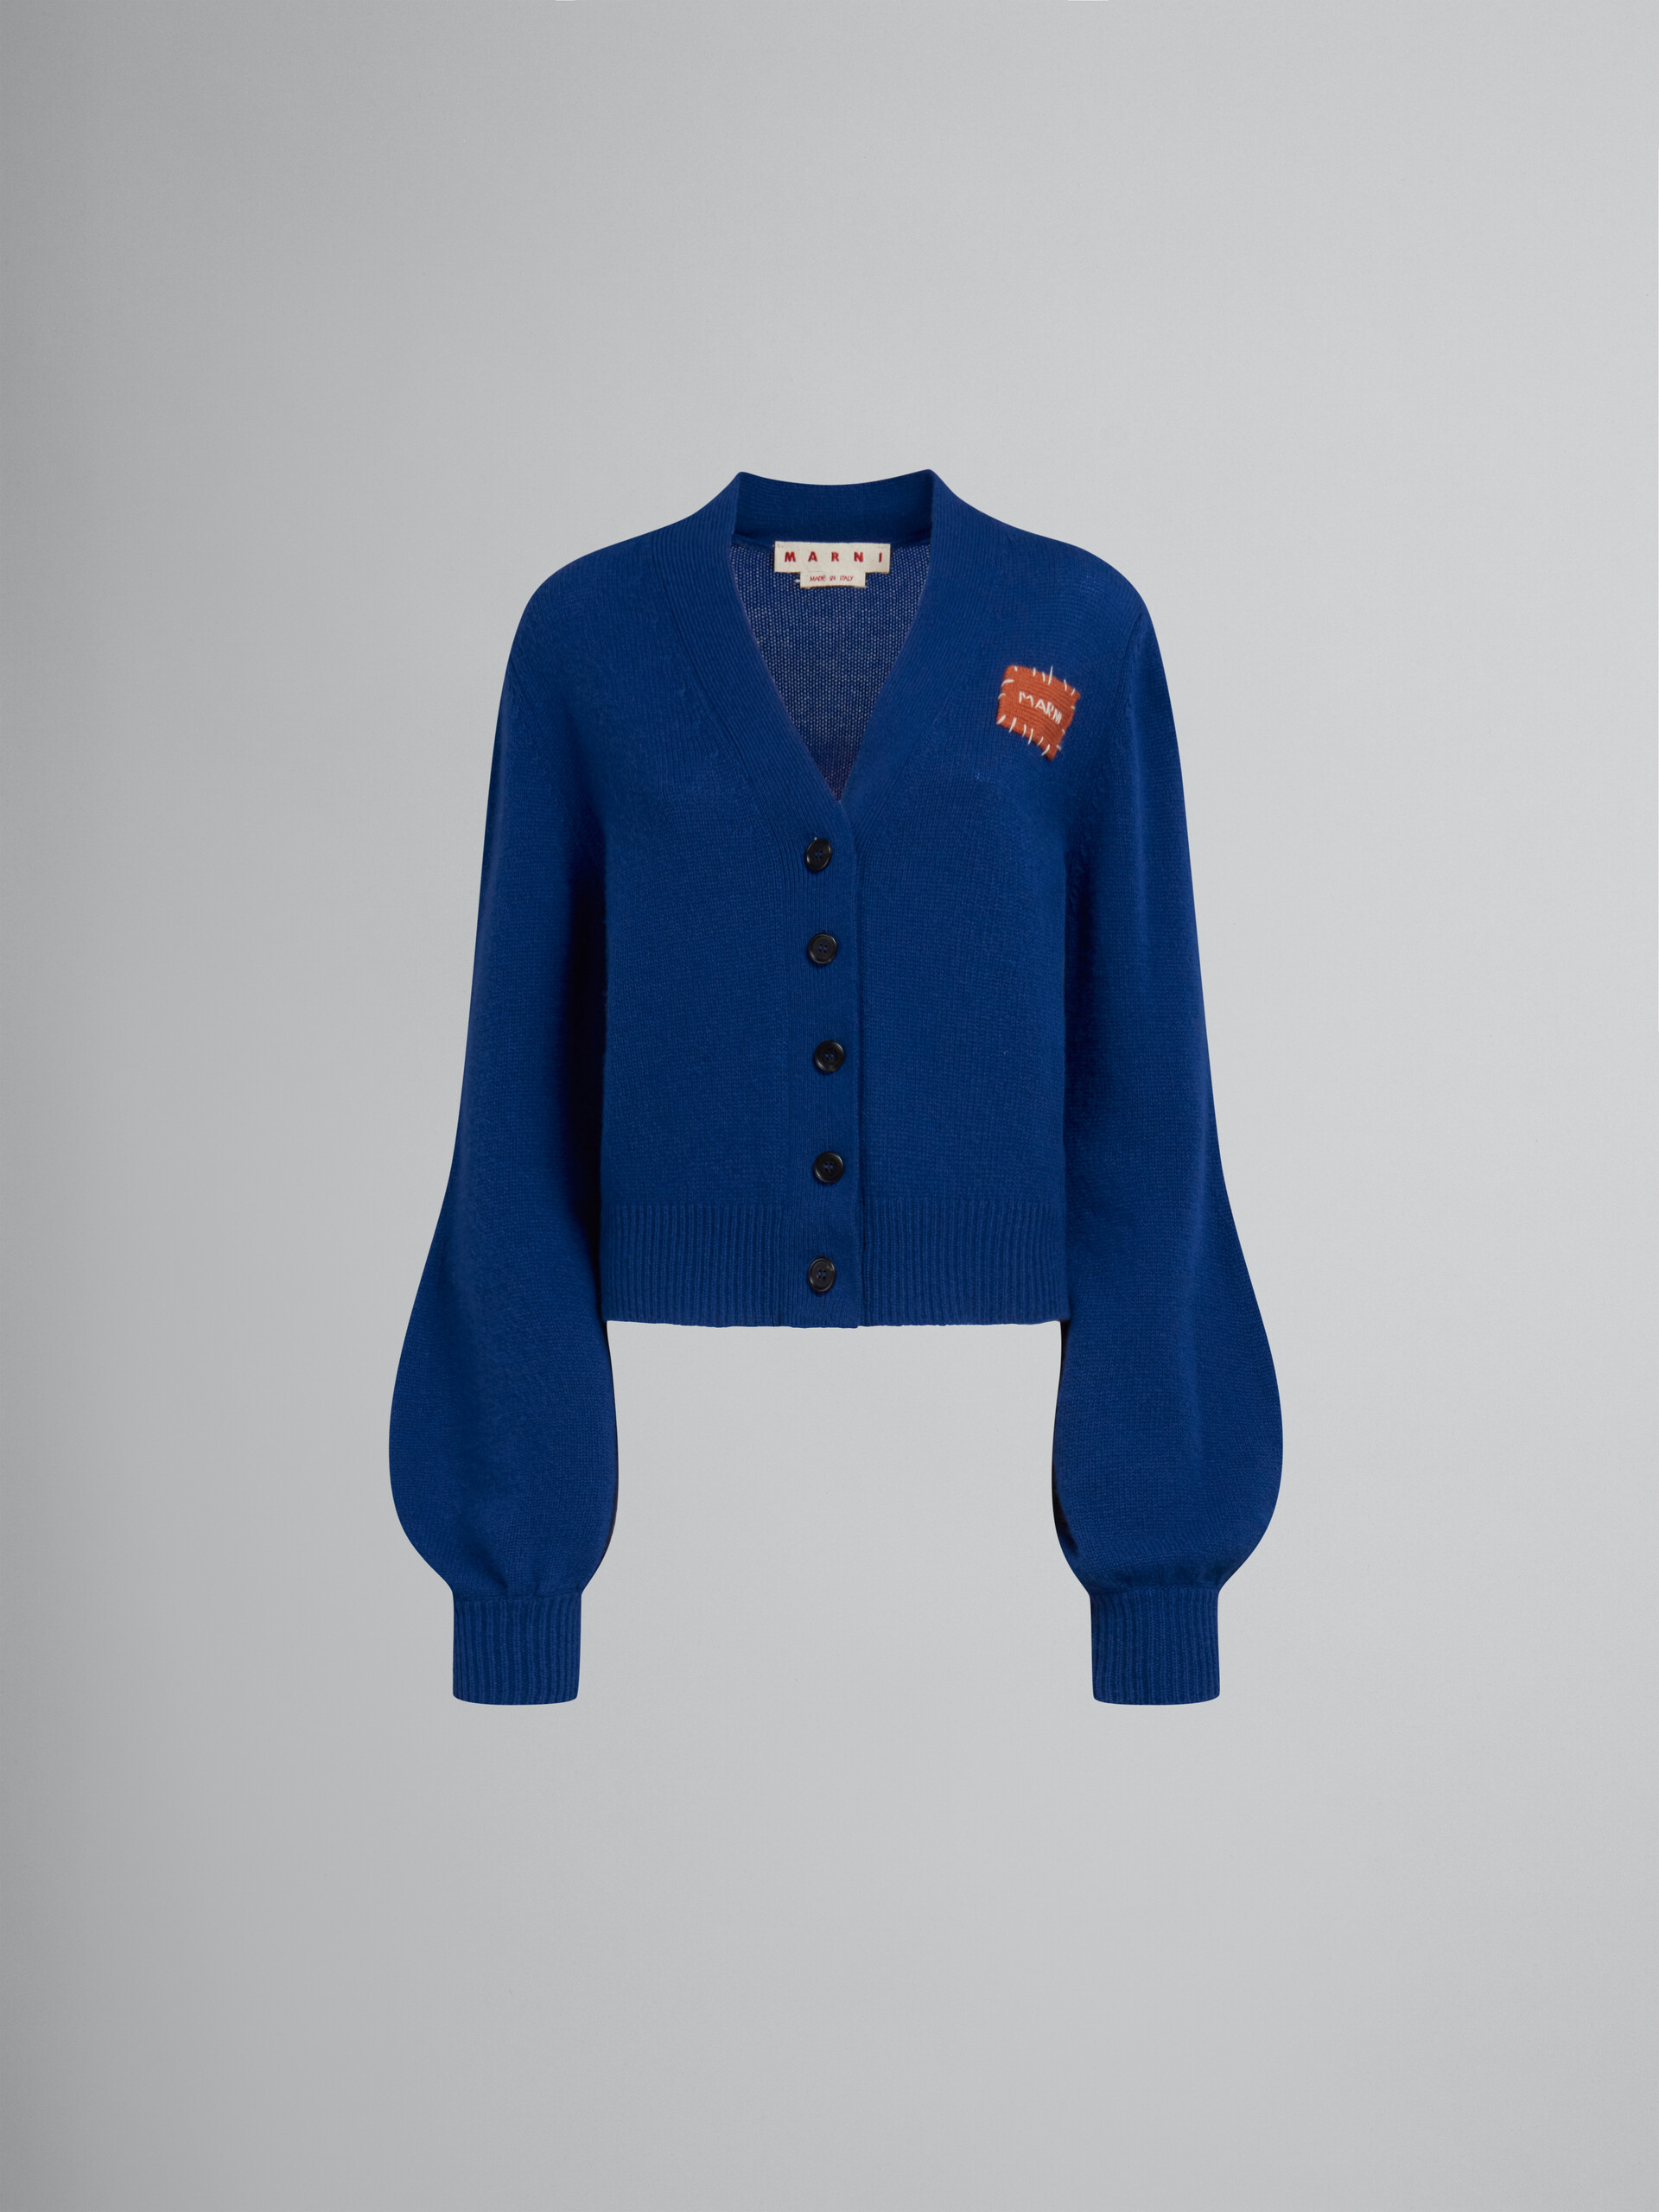 Blue cashmere cardigan with Marni mending patch - Pullovers - Image 1